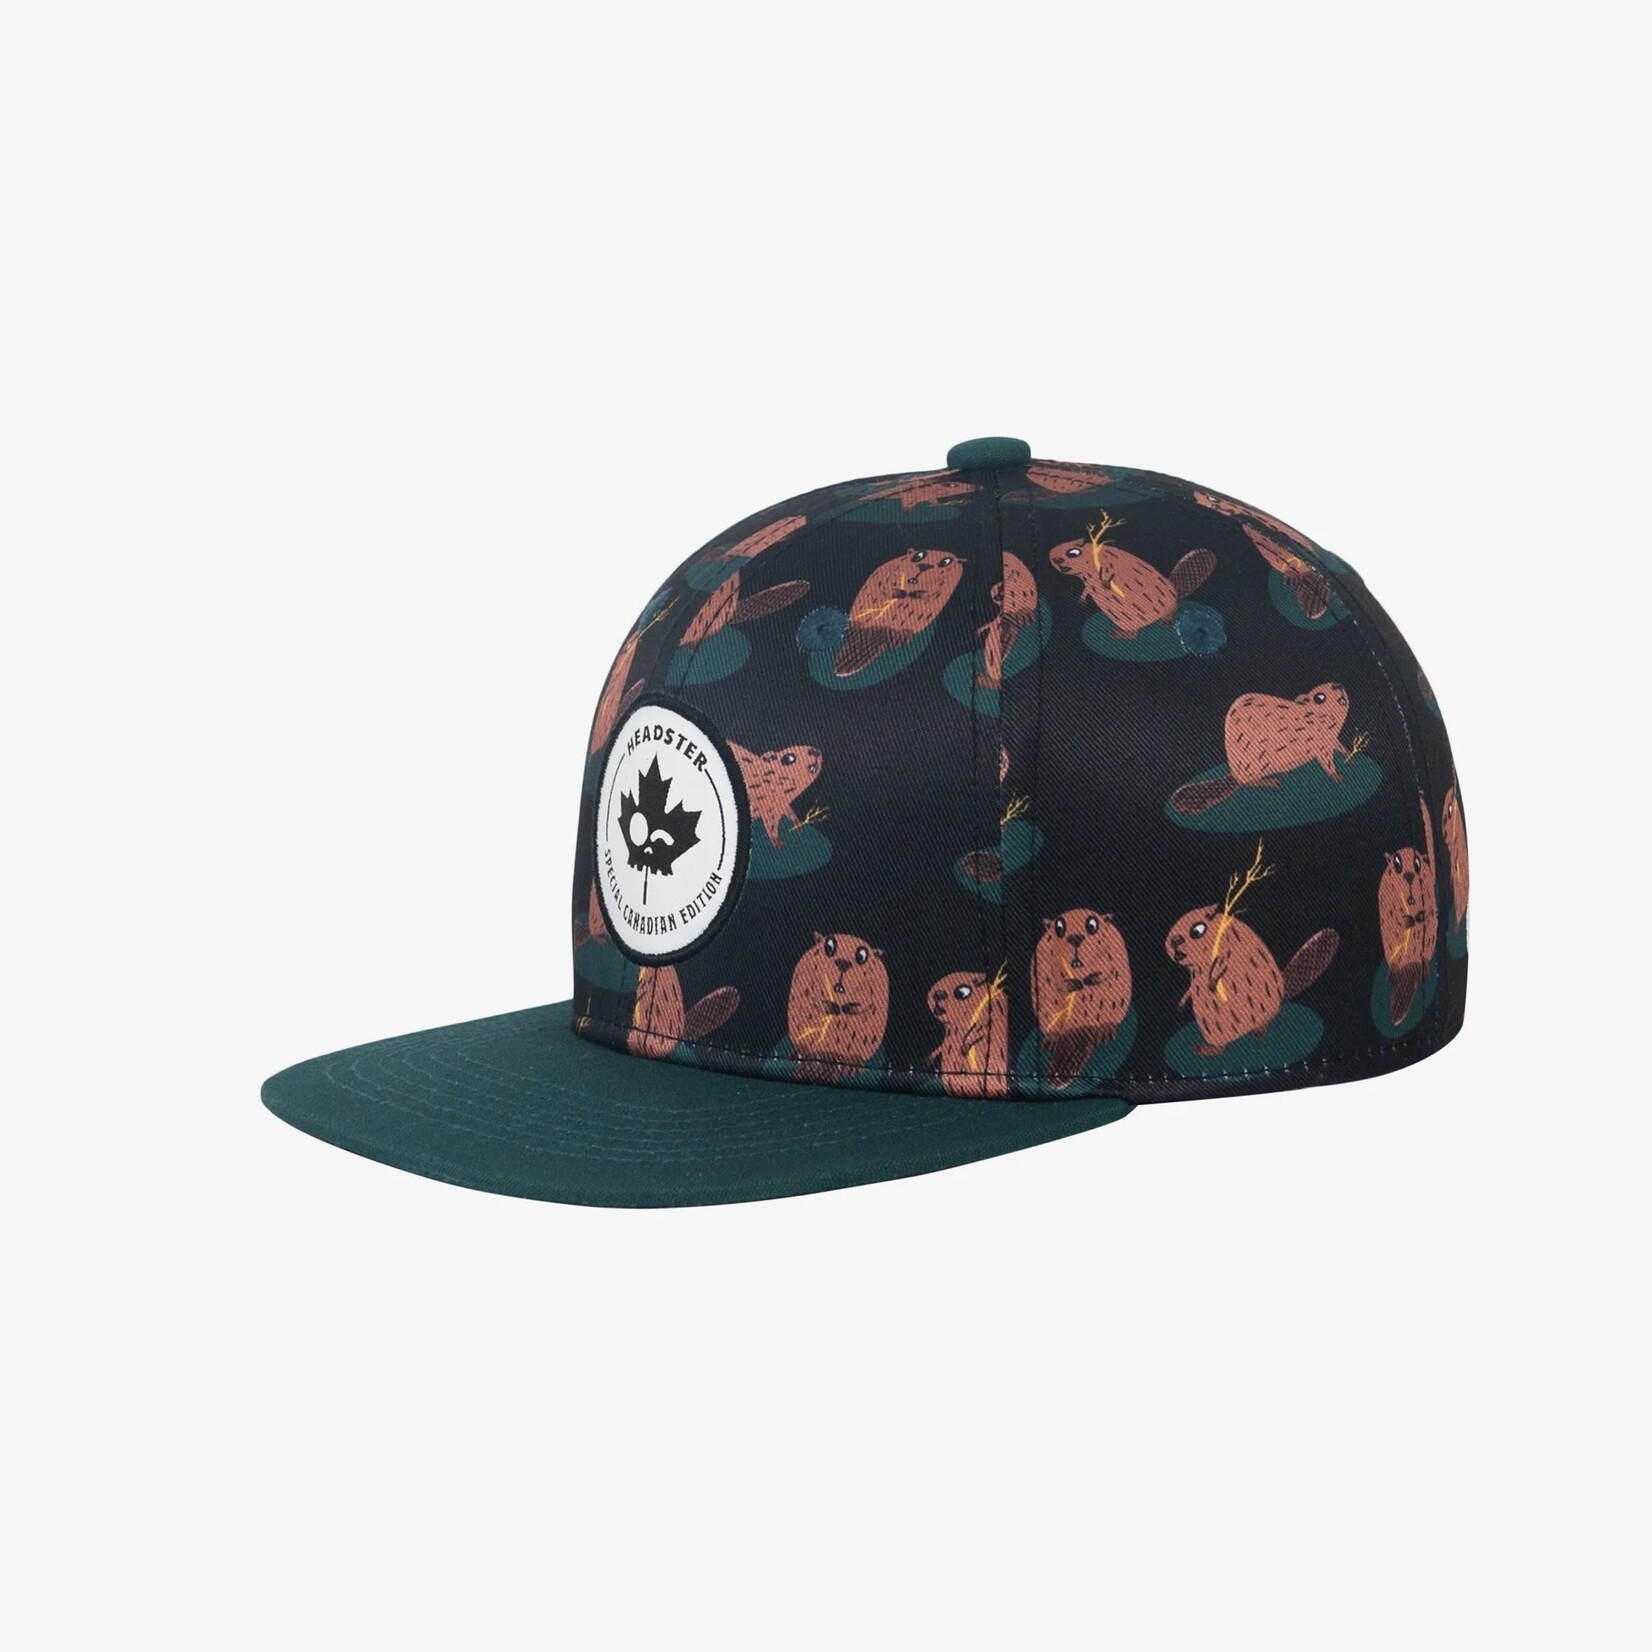 Headster Headster - Beaver Tail Snapback